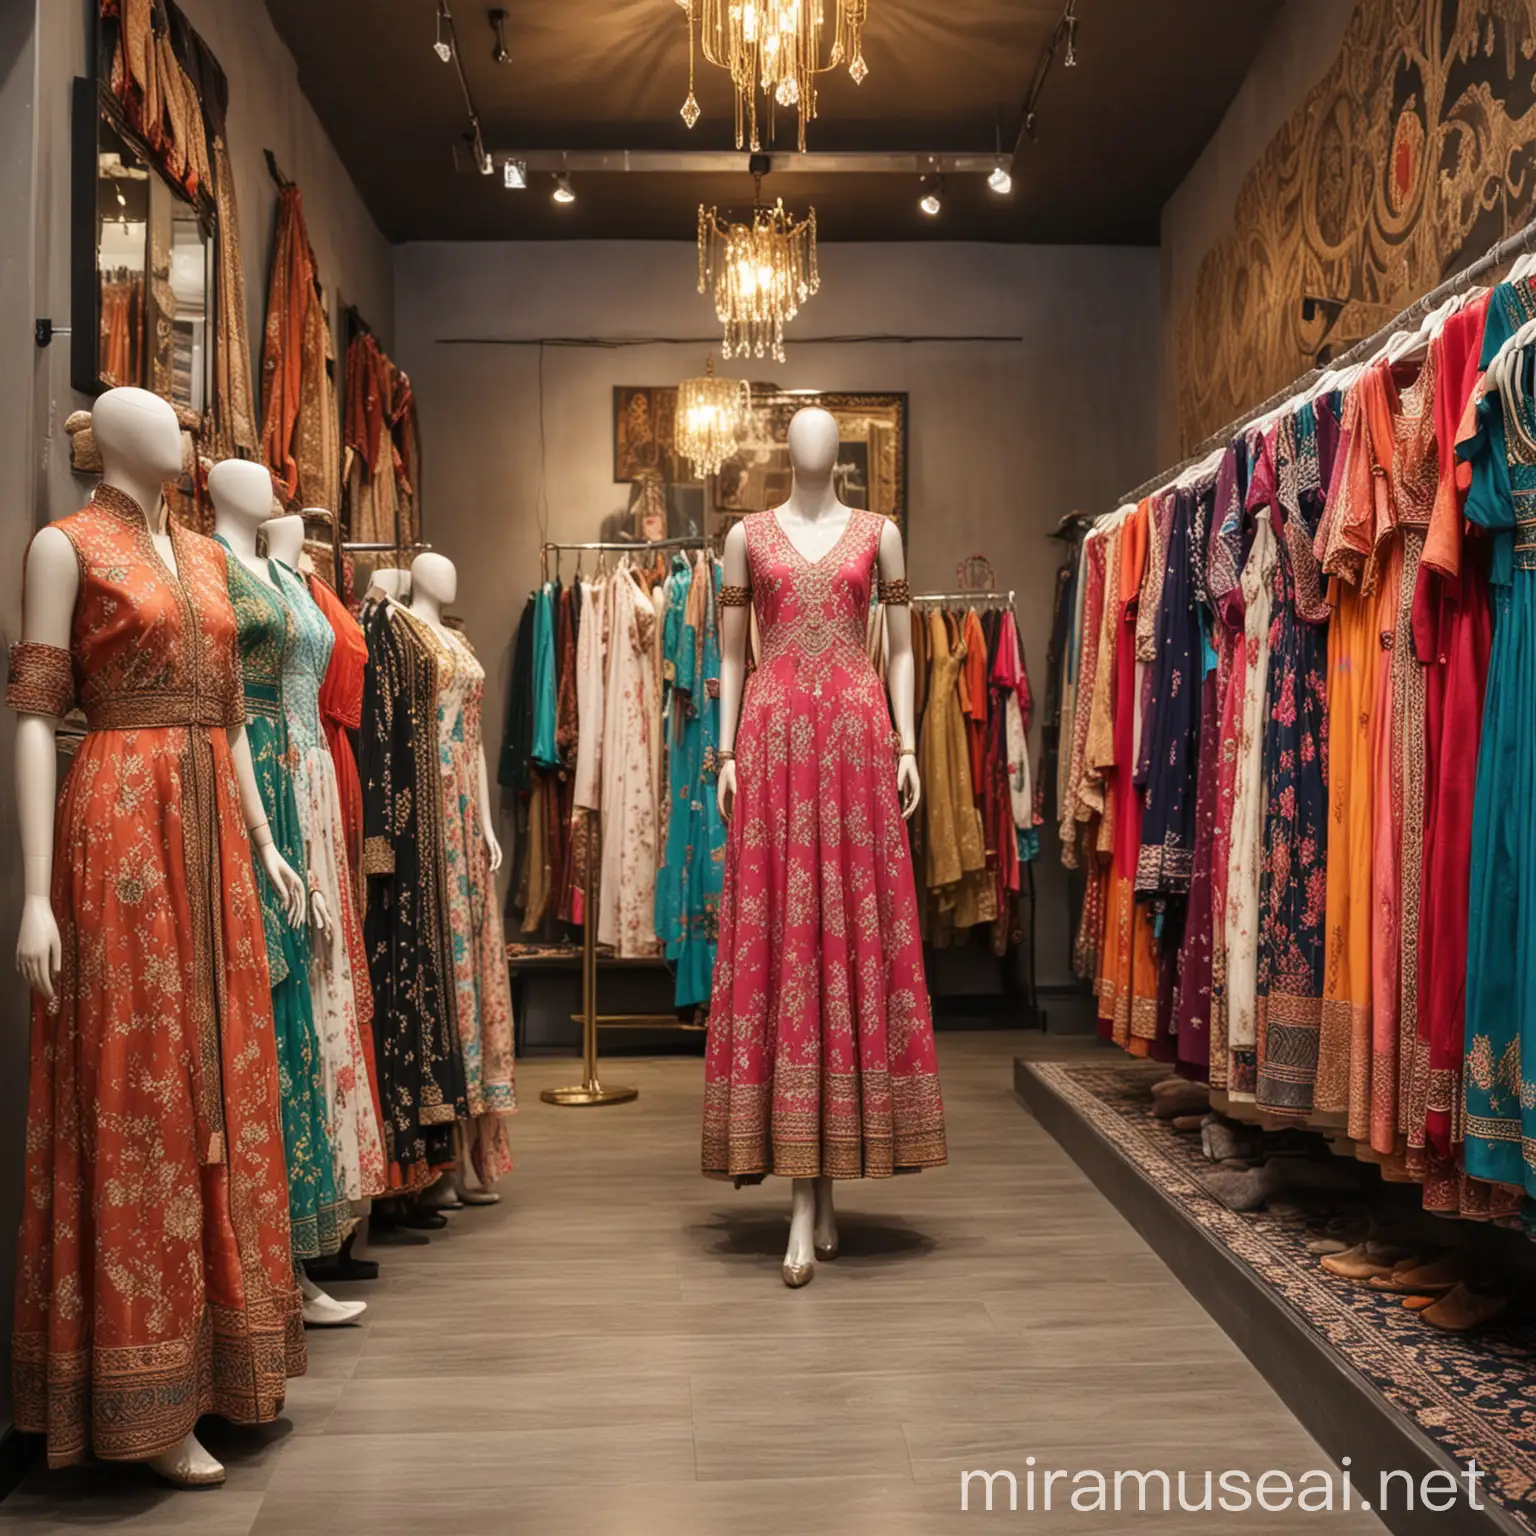  interior of boutique shop with desi eastern asian dresses